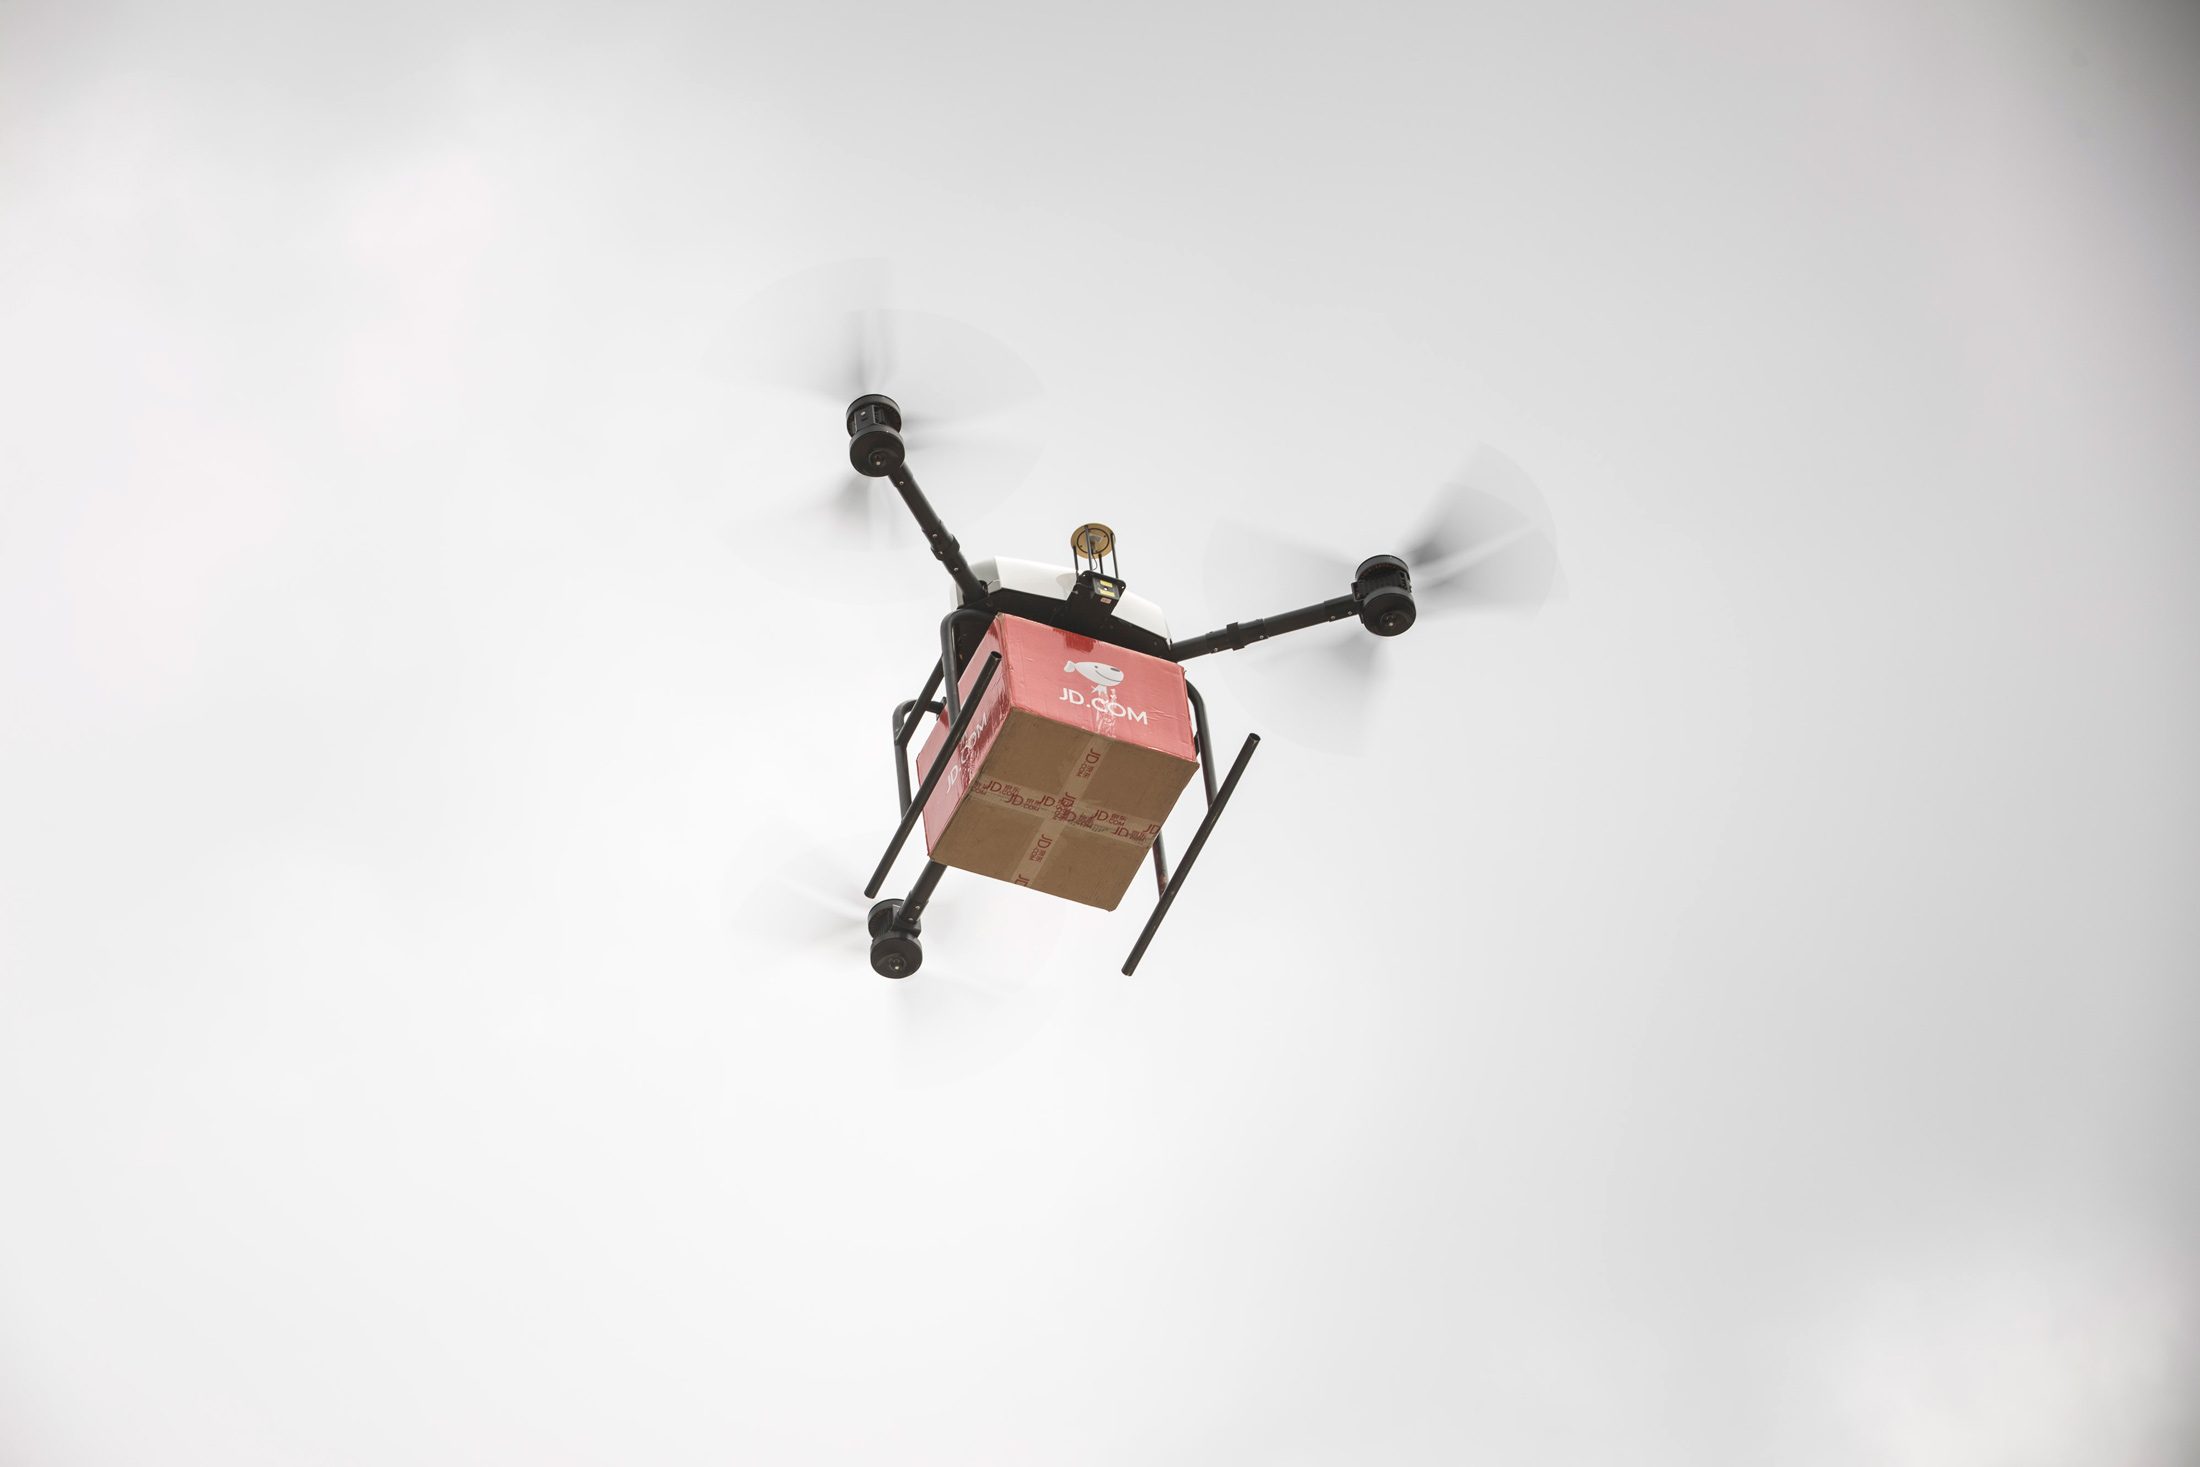 China speeds to take the lead in drone-delivery race